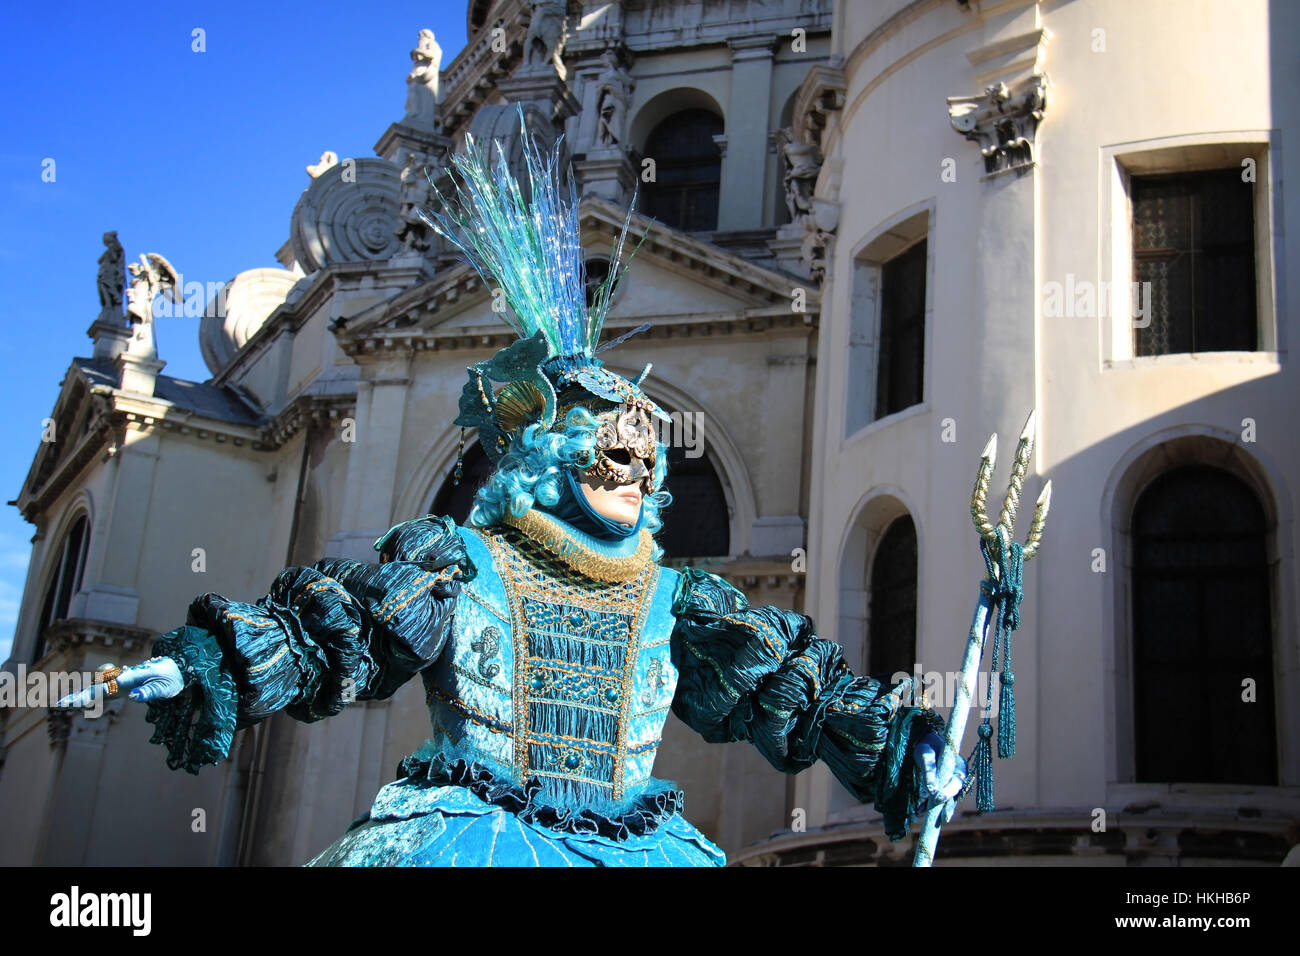 Venice carnival costume and mask. Stock Photo